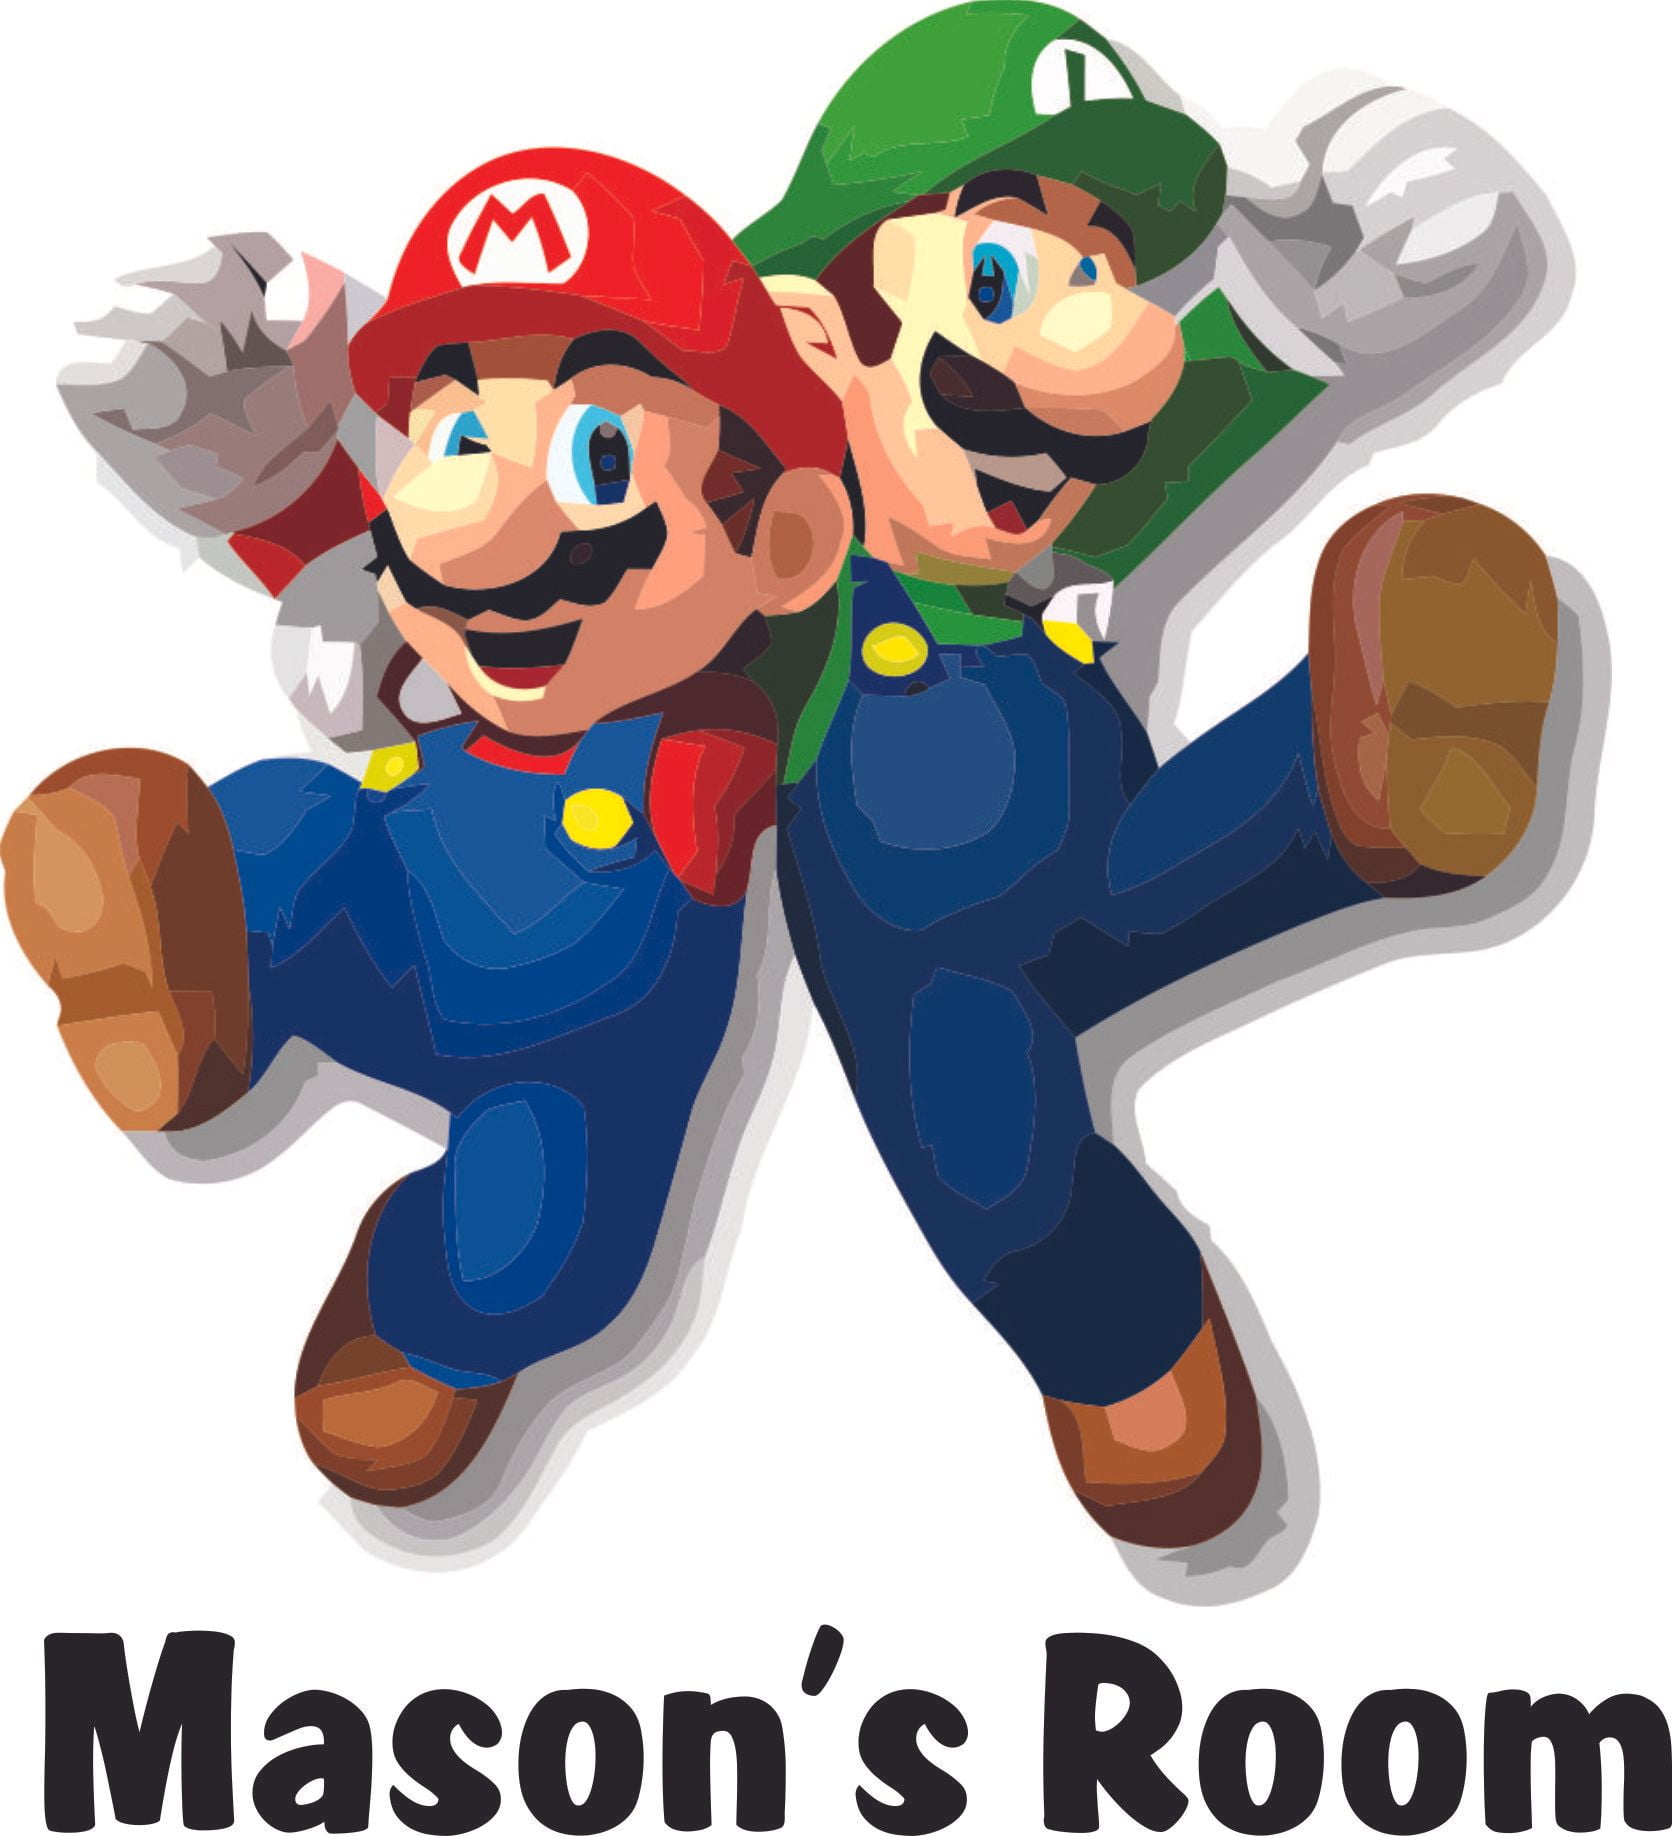 Set of 24 Stickers Free Shipping Mario and Luigi Video Game Stickers